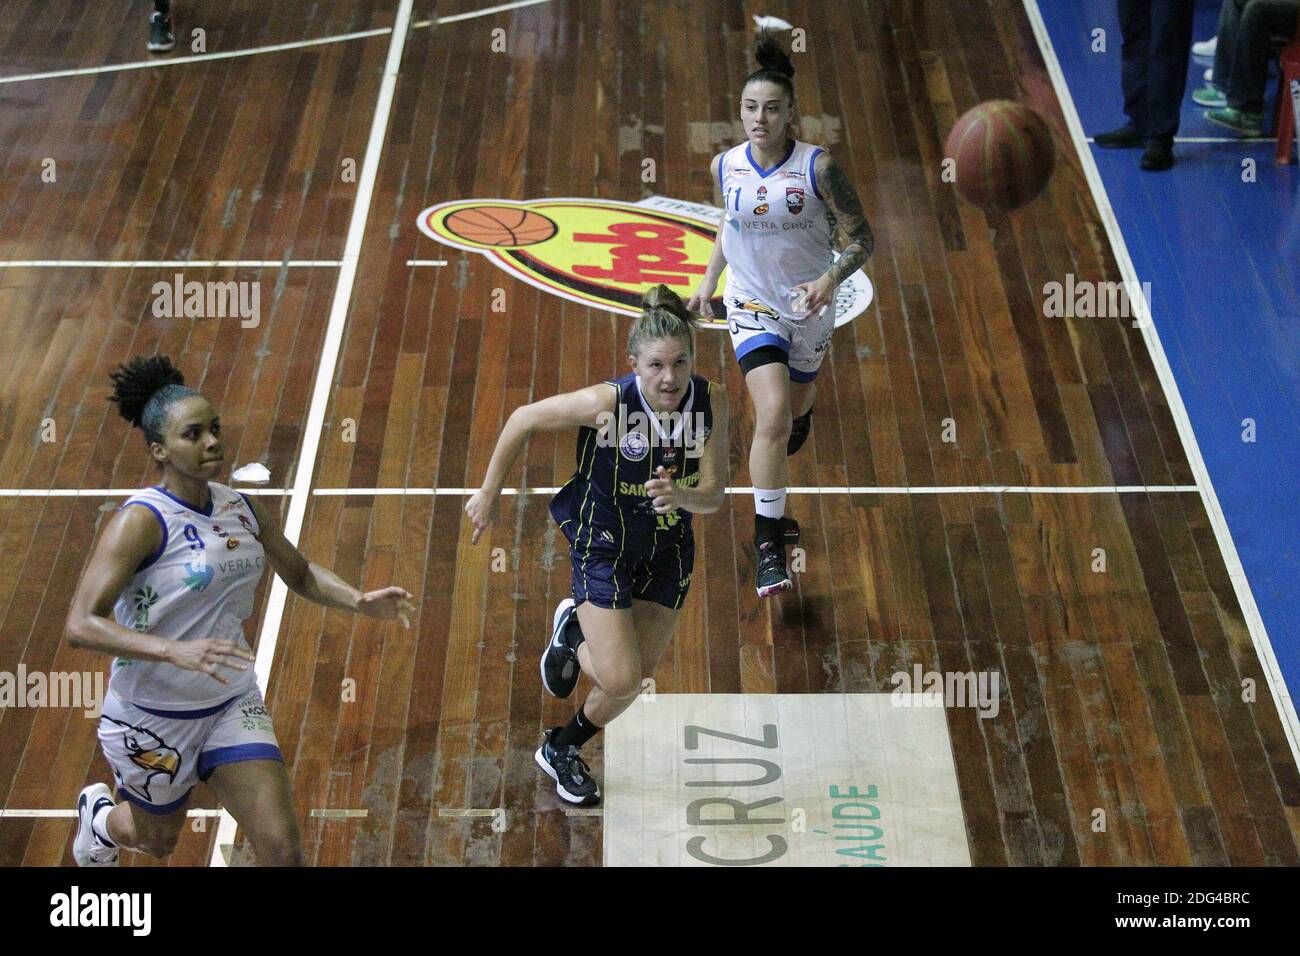 Campinas, Brazil. 07th Dec, 2020. The Vera Cruz women's basketball team faced this Monday, the Santo André/Apaba team for the Paulista championship at the Ponte Preta gym in Campinas (SP). The player Ornela and Jeane Morais in the game. Credit: Leandro Ferreira/FotoArena/Alamy Live News Stock Photo